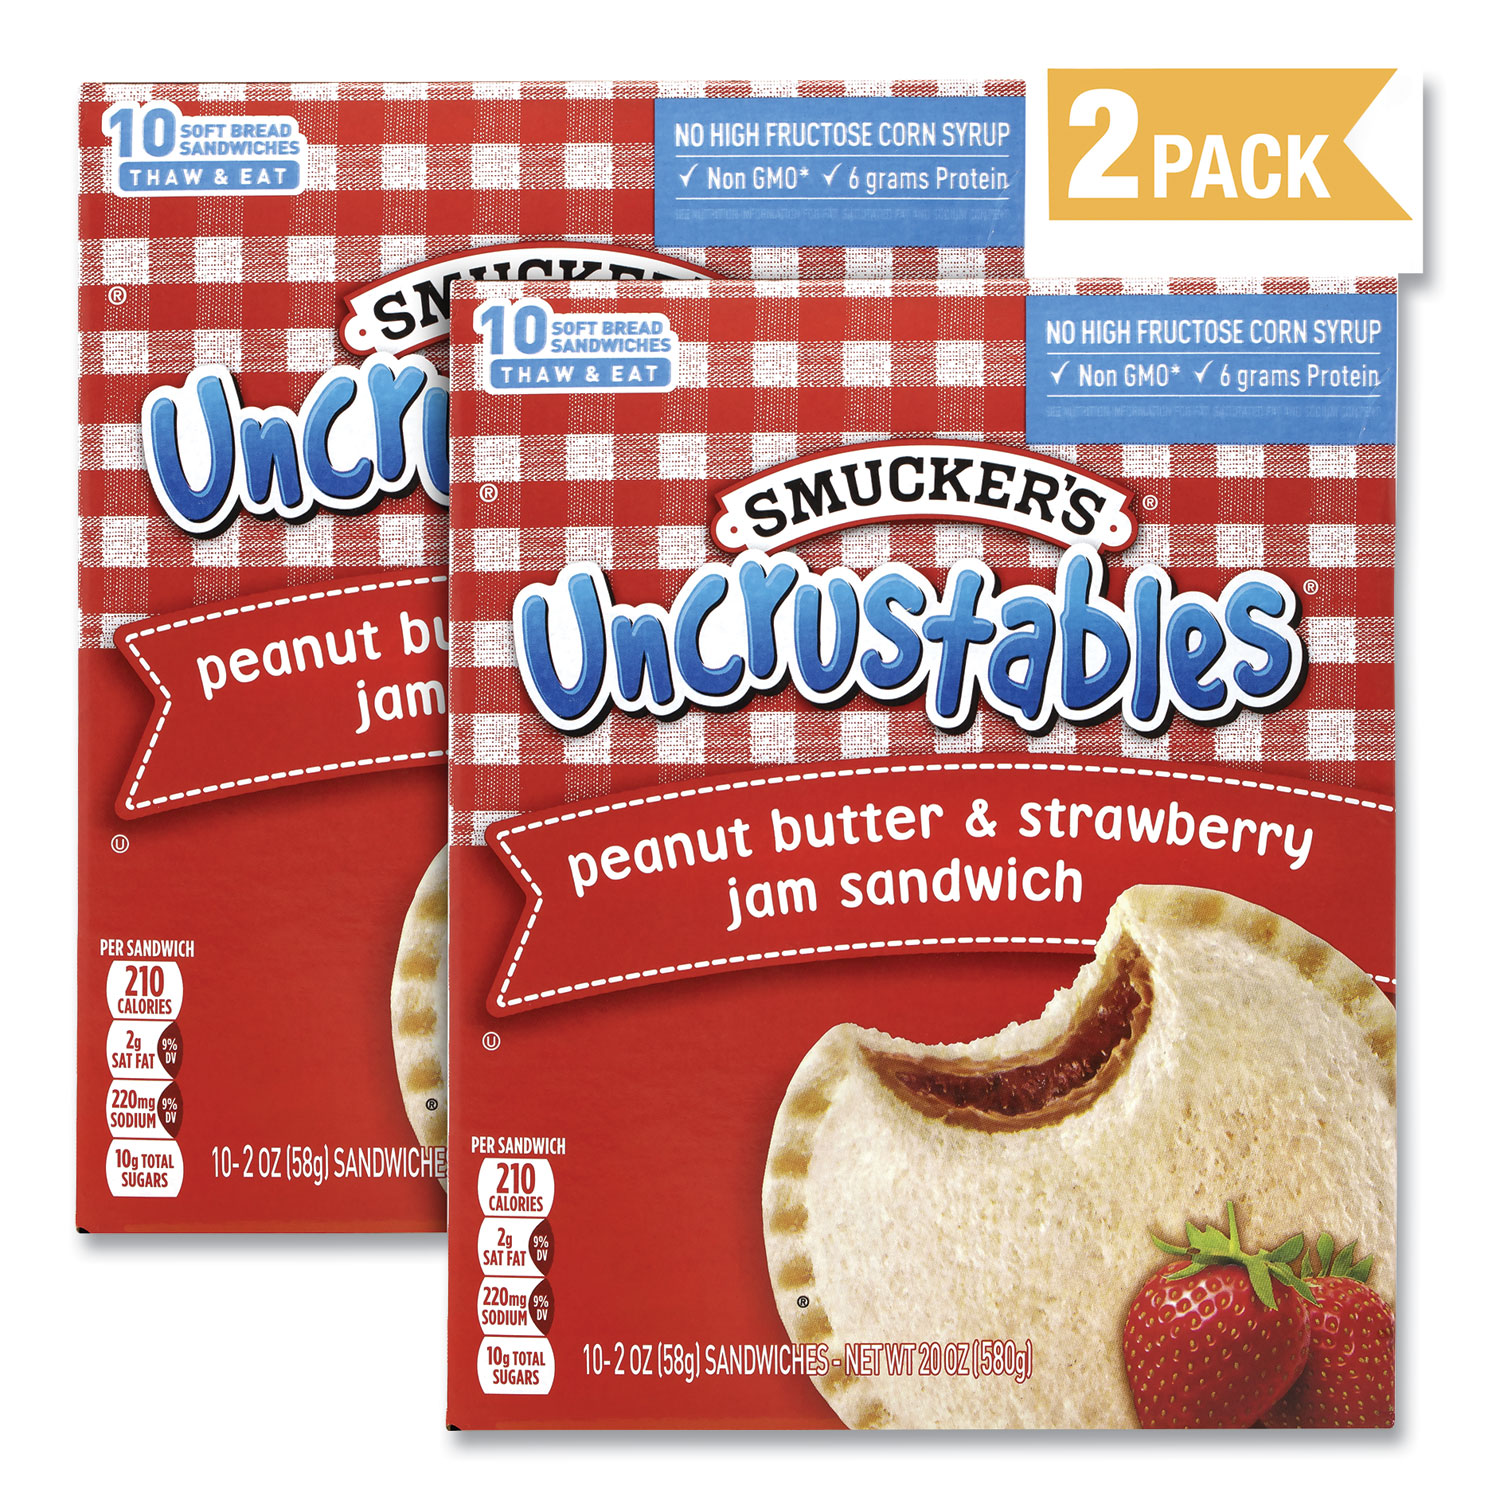 Smuckers® UNCRUSTABLES Soft Bread Sandwiches, Strawberry Jam, 2 oz, 10 Sandwiches/Pack, 2 Packs/Box, Free Delivery in 1-4 Business Days